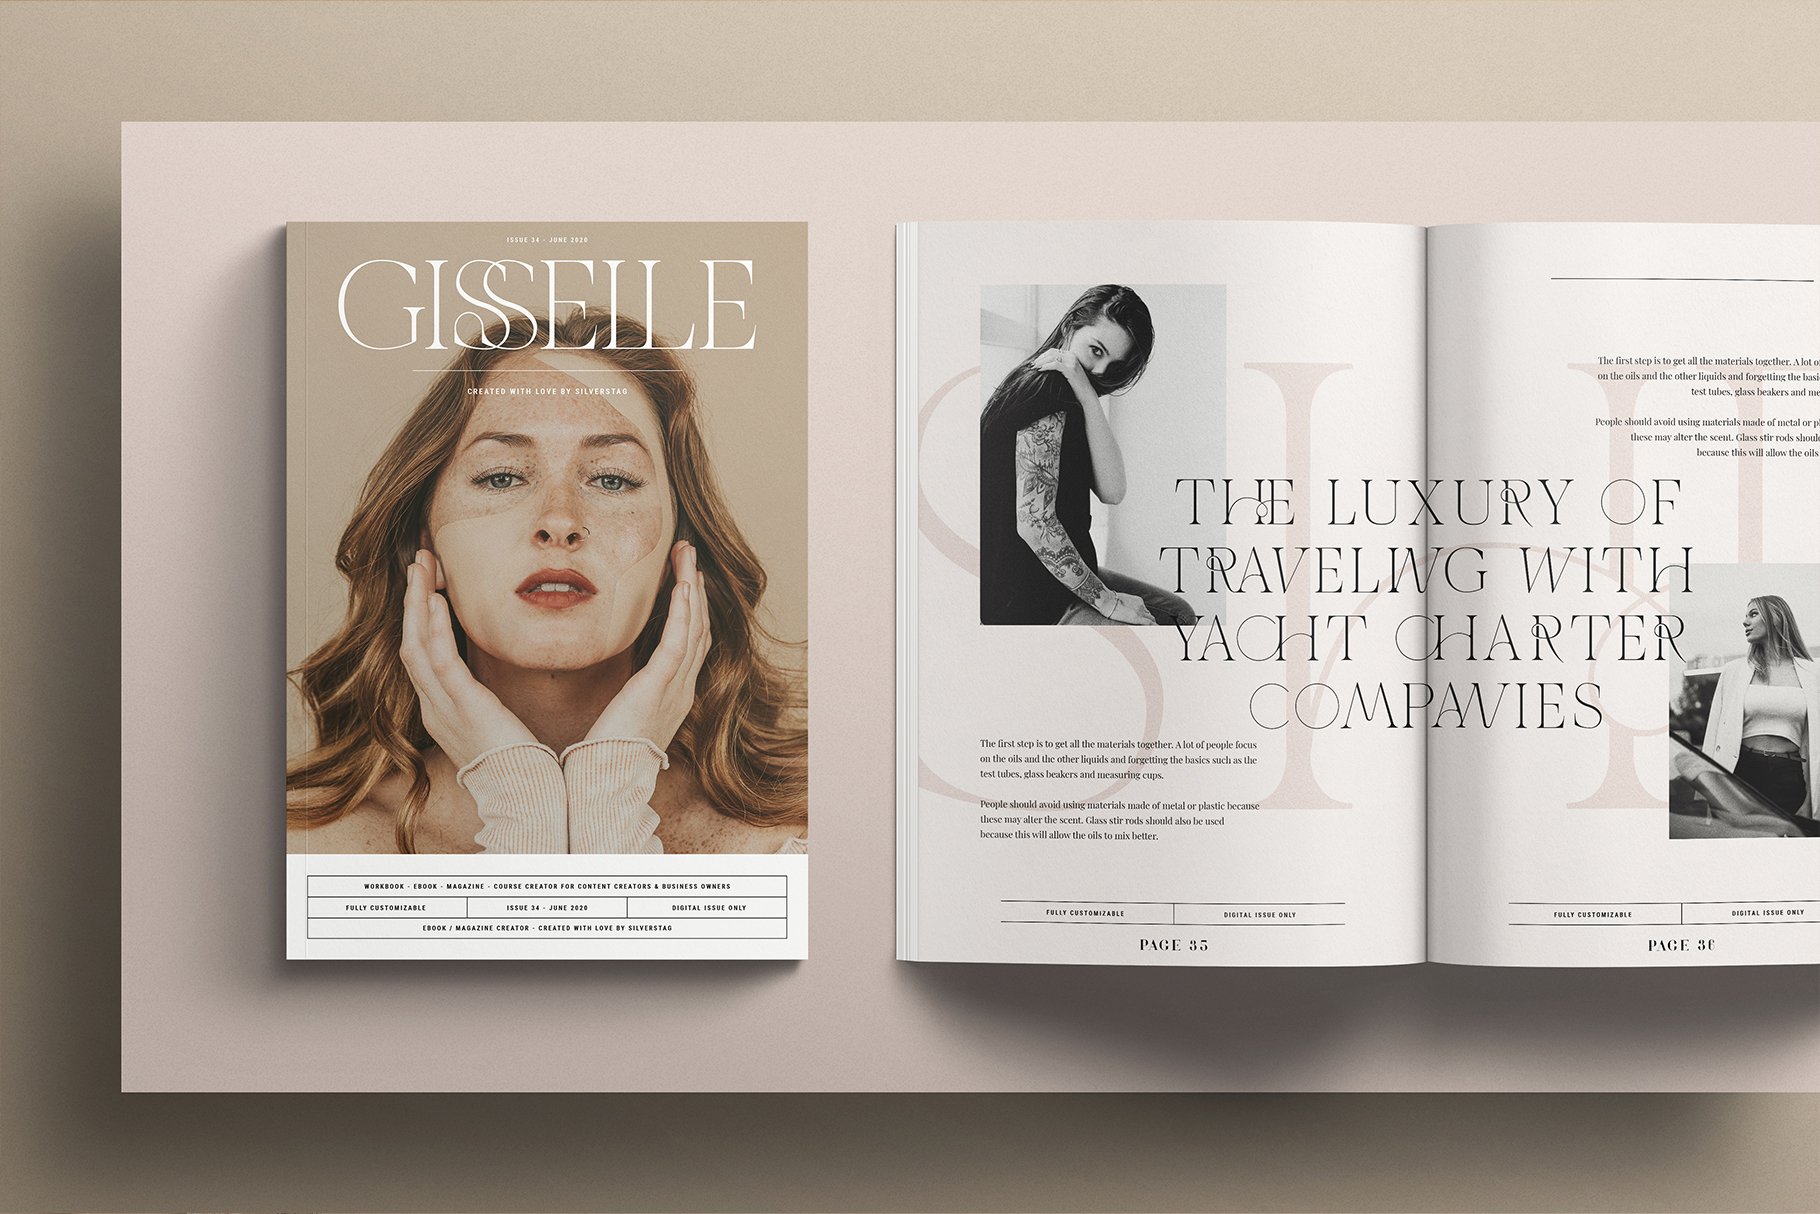 Cool font for fashion magazines.